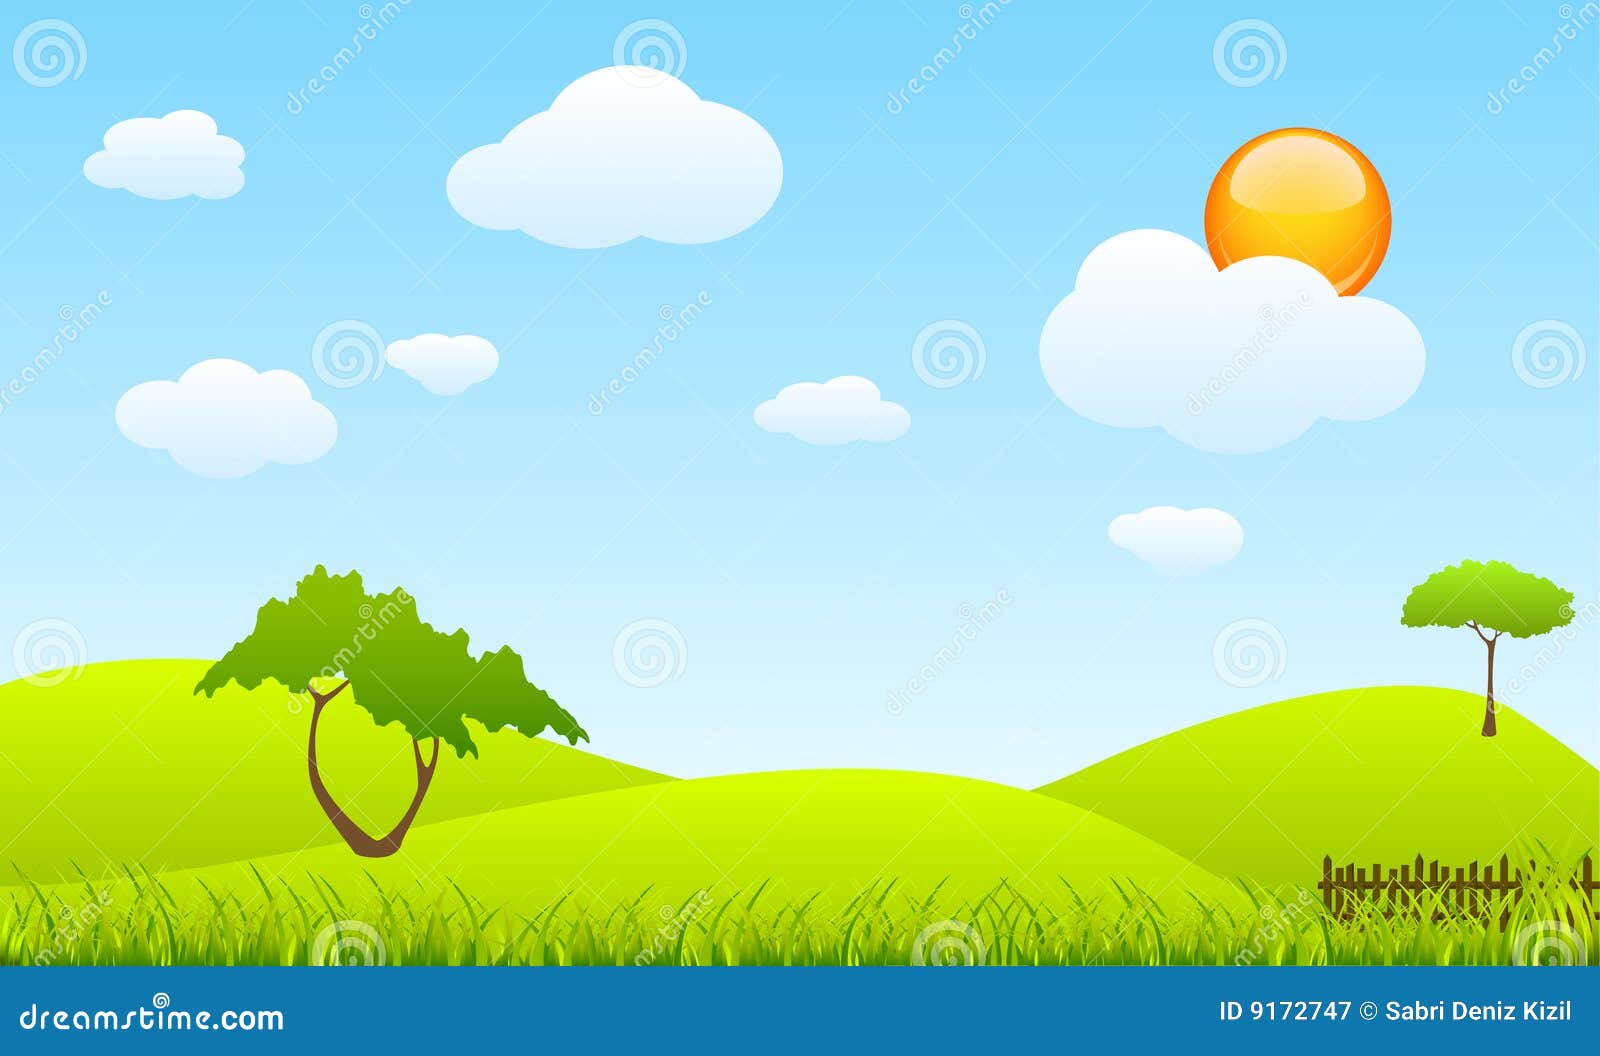 spring nature clipart - photo #48